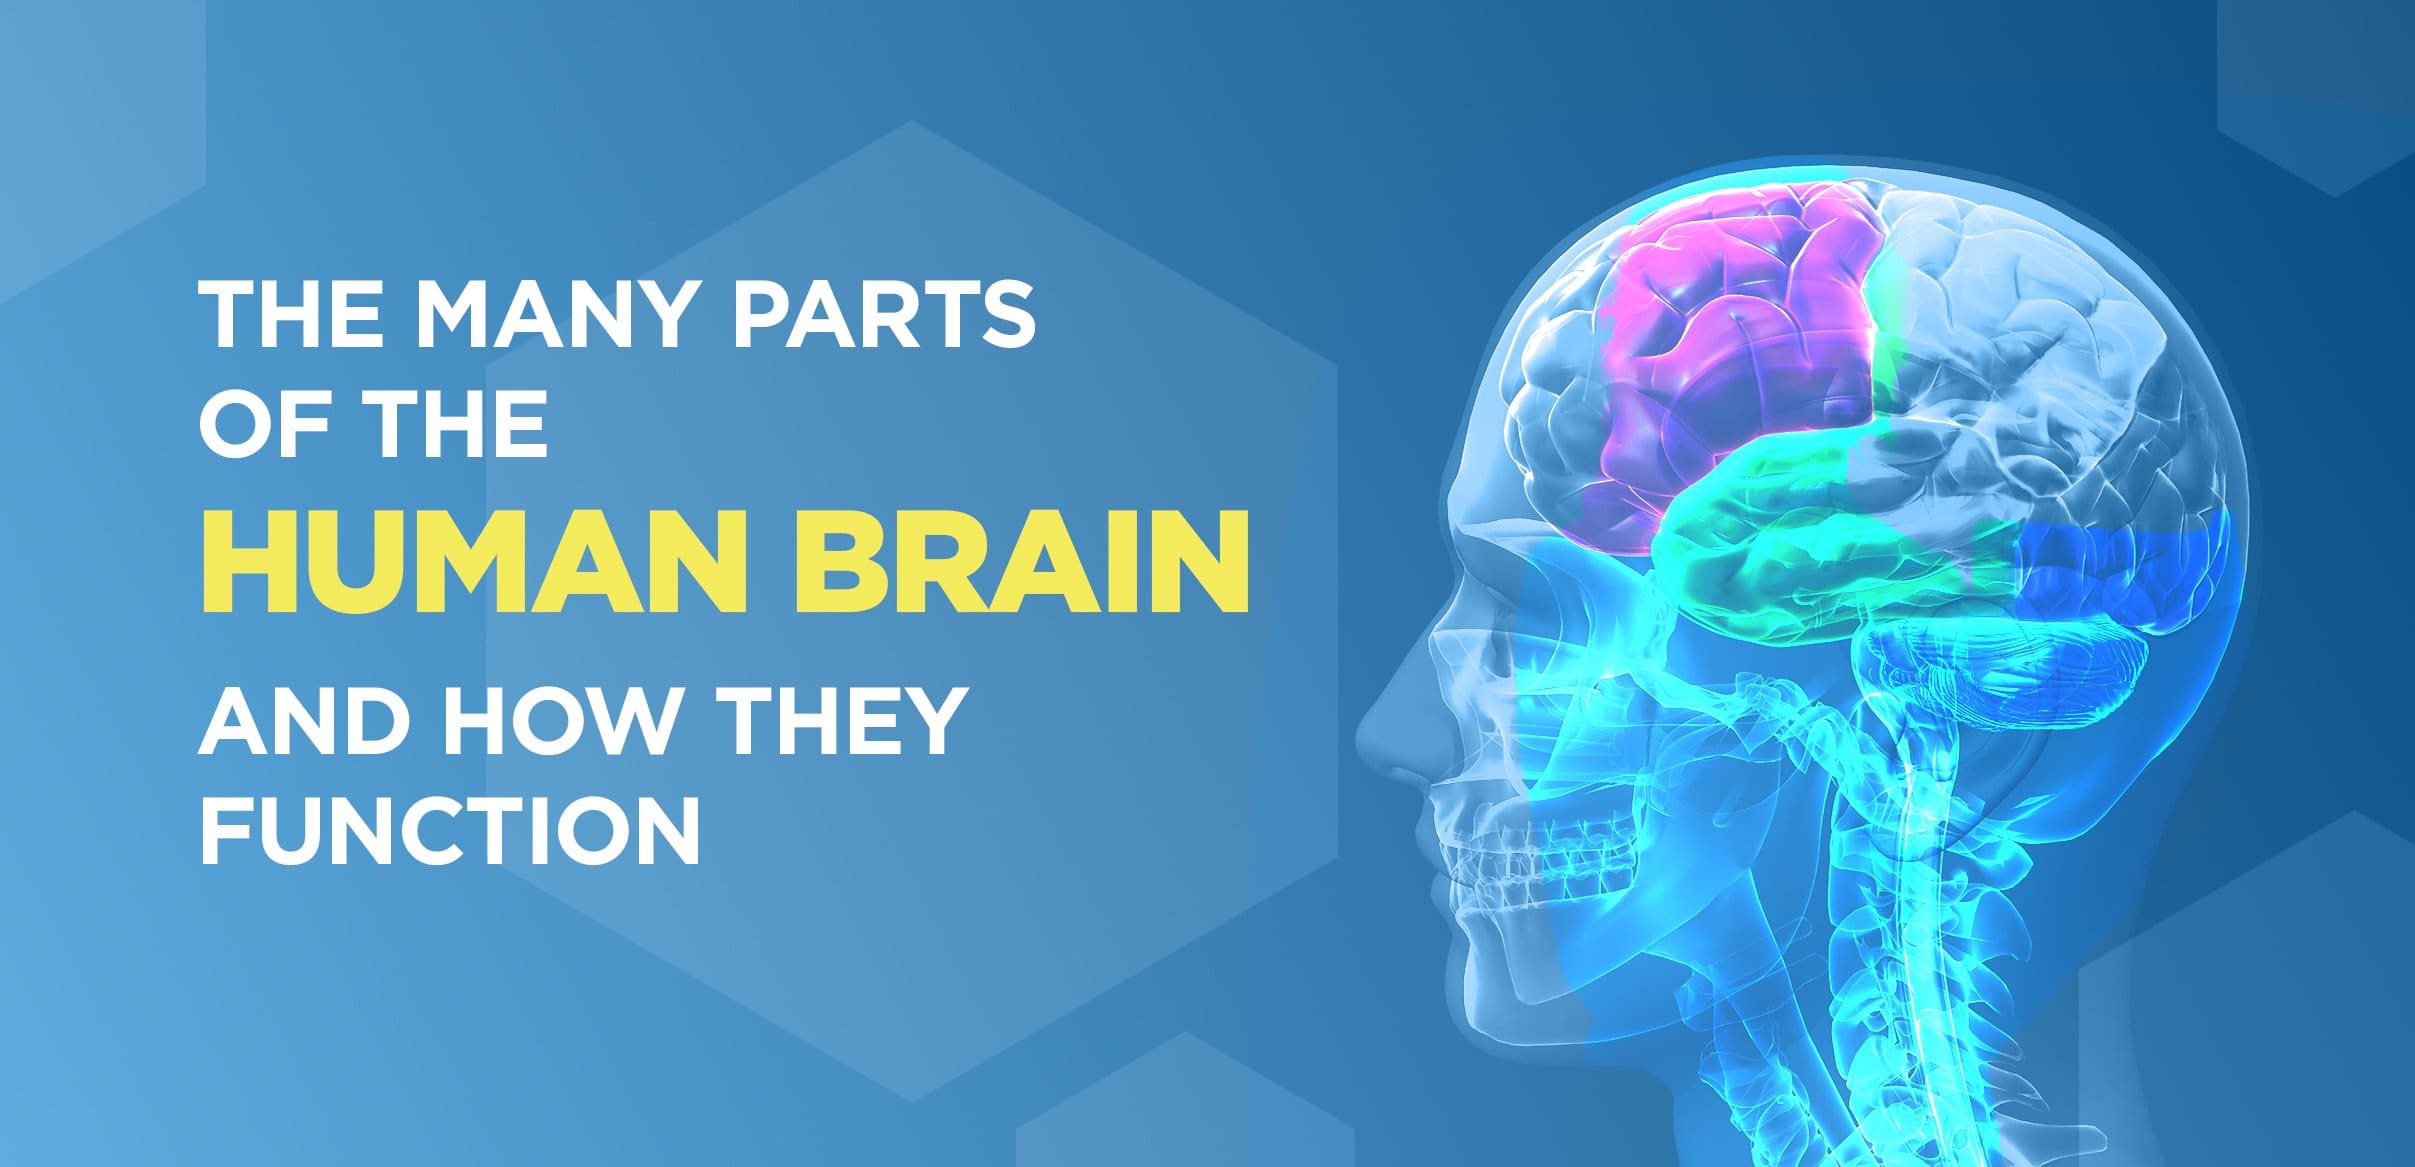 The Many Parts of the Human Brain and How They Function